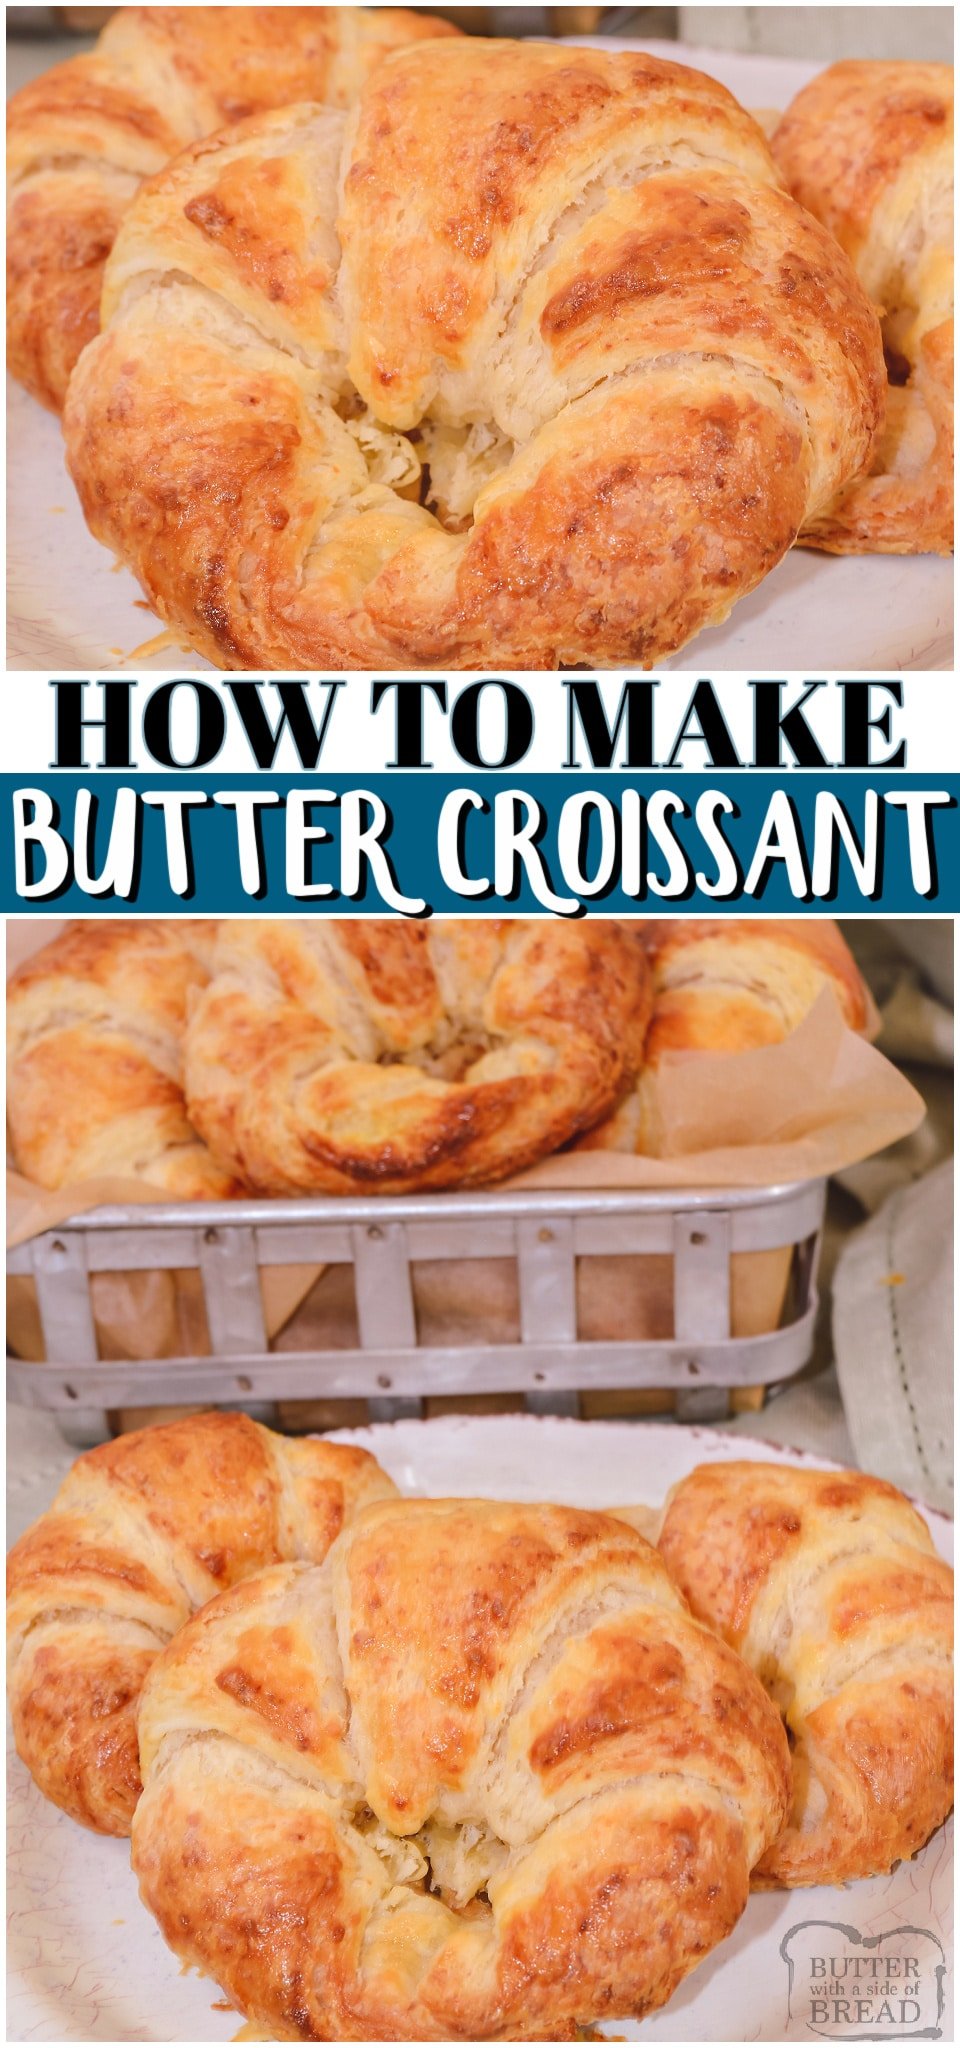 Classic Butter Croissants with instructions that any home baker can follow! Homemade Croissants with flaky layers & fabulous buttery flavor that are truly irresistible! #pastry #bread #croissant #butter #homemade #flakylayers #easyrecipe from BUTTER WITH A SIDE OF BREAD